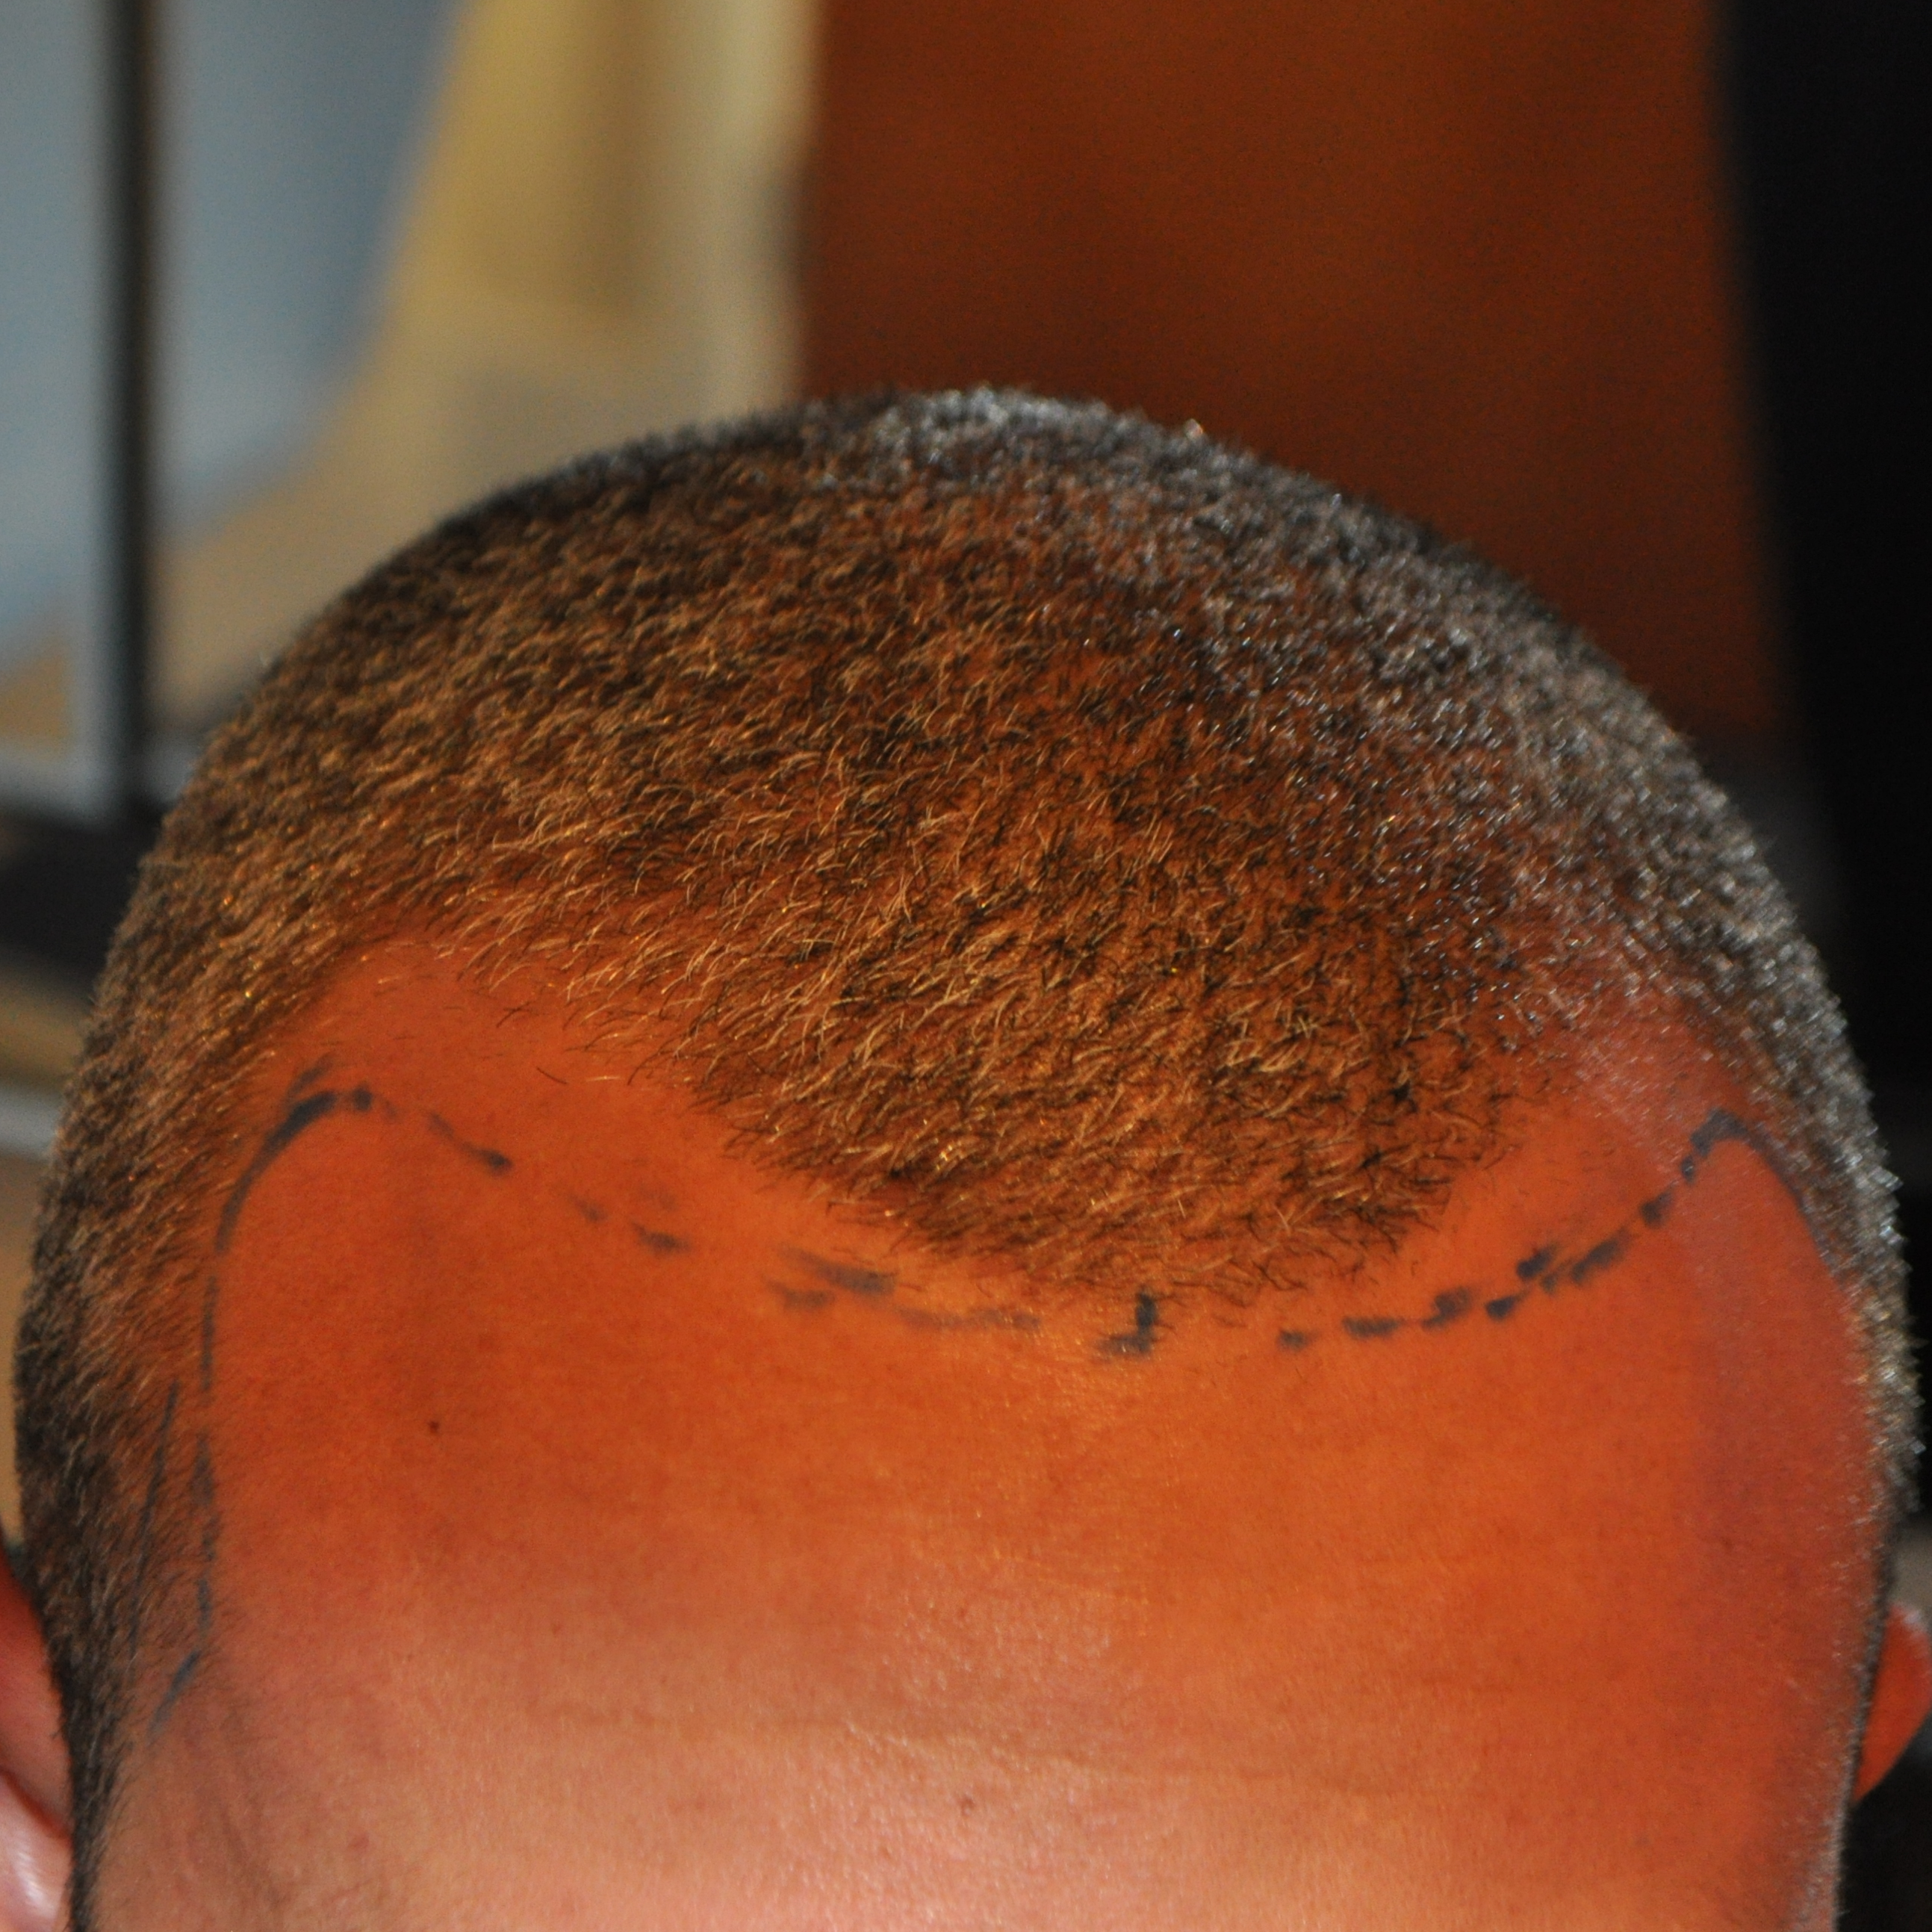 Frontal Balding: Causes, Symptoms, Treatments, Wimpole Clinic